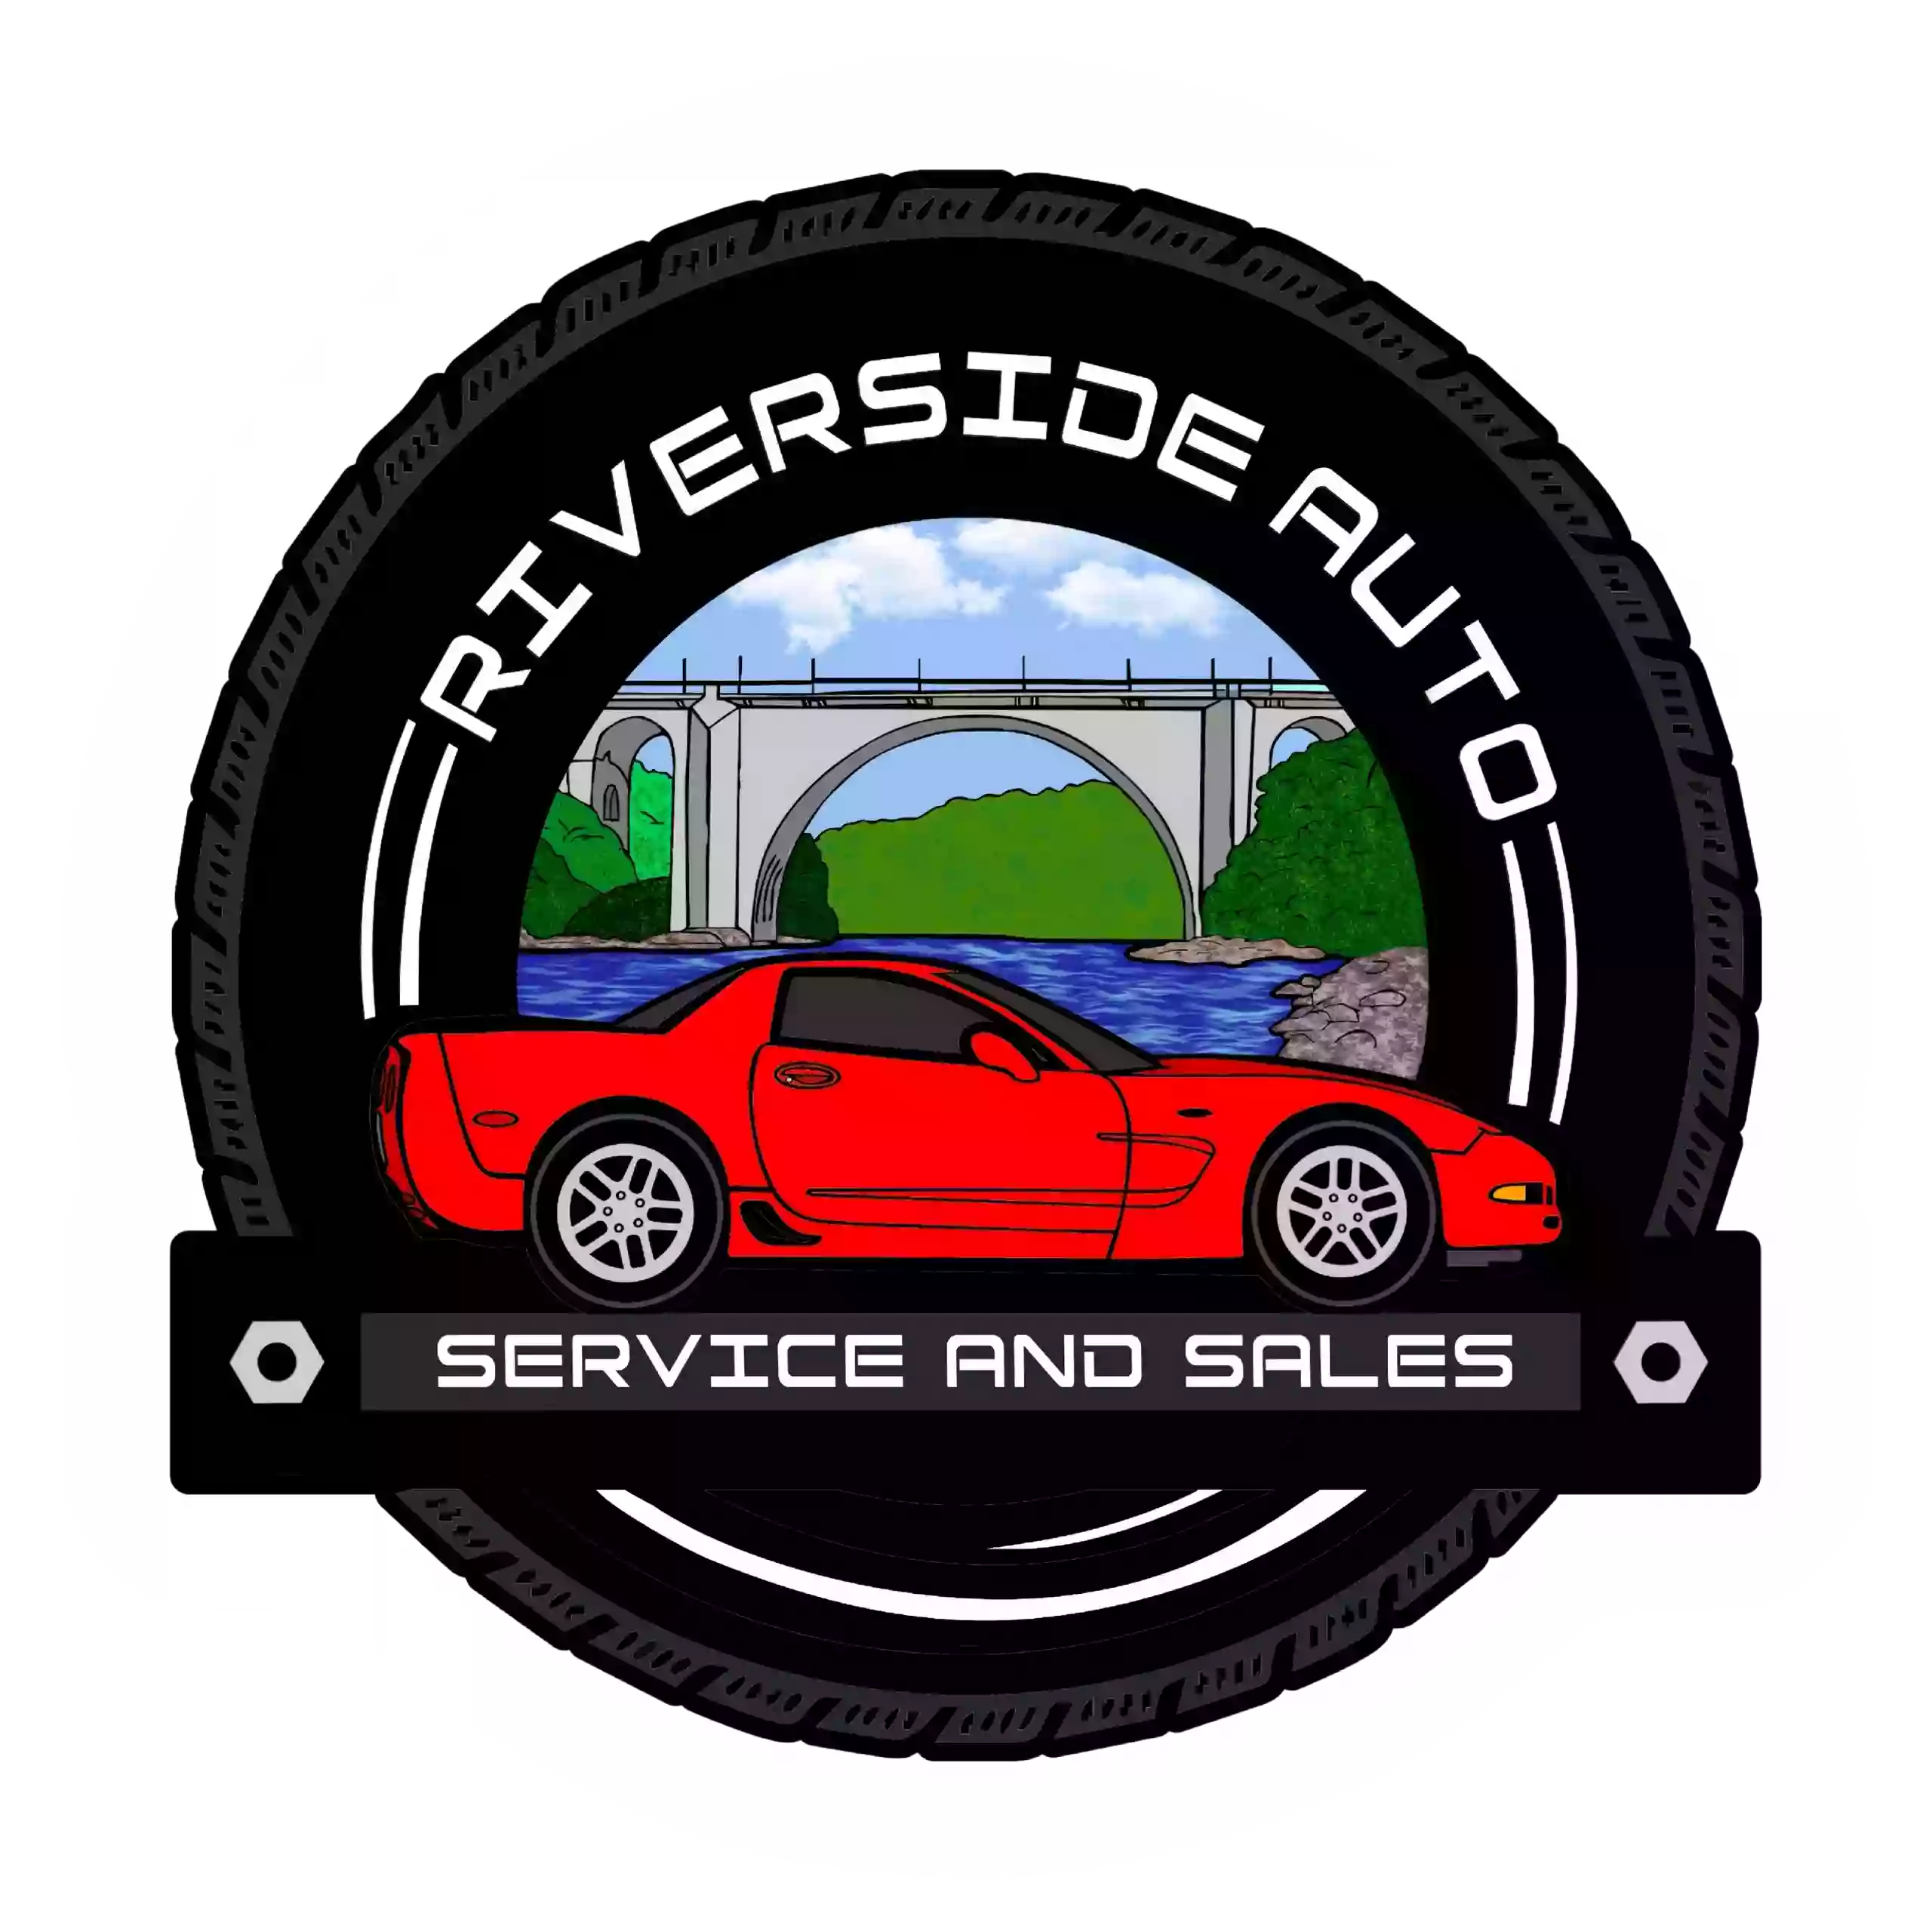 Riverside Auto Service and Sales